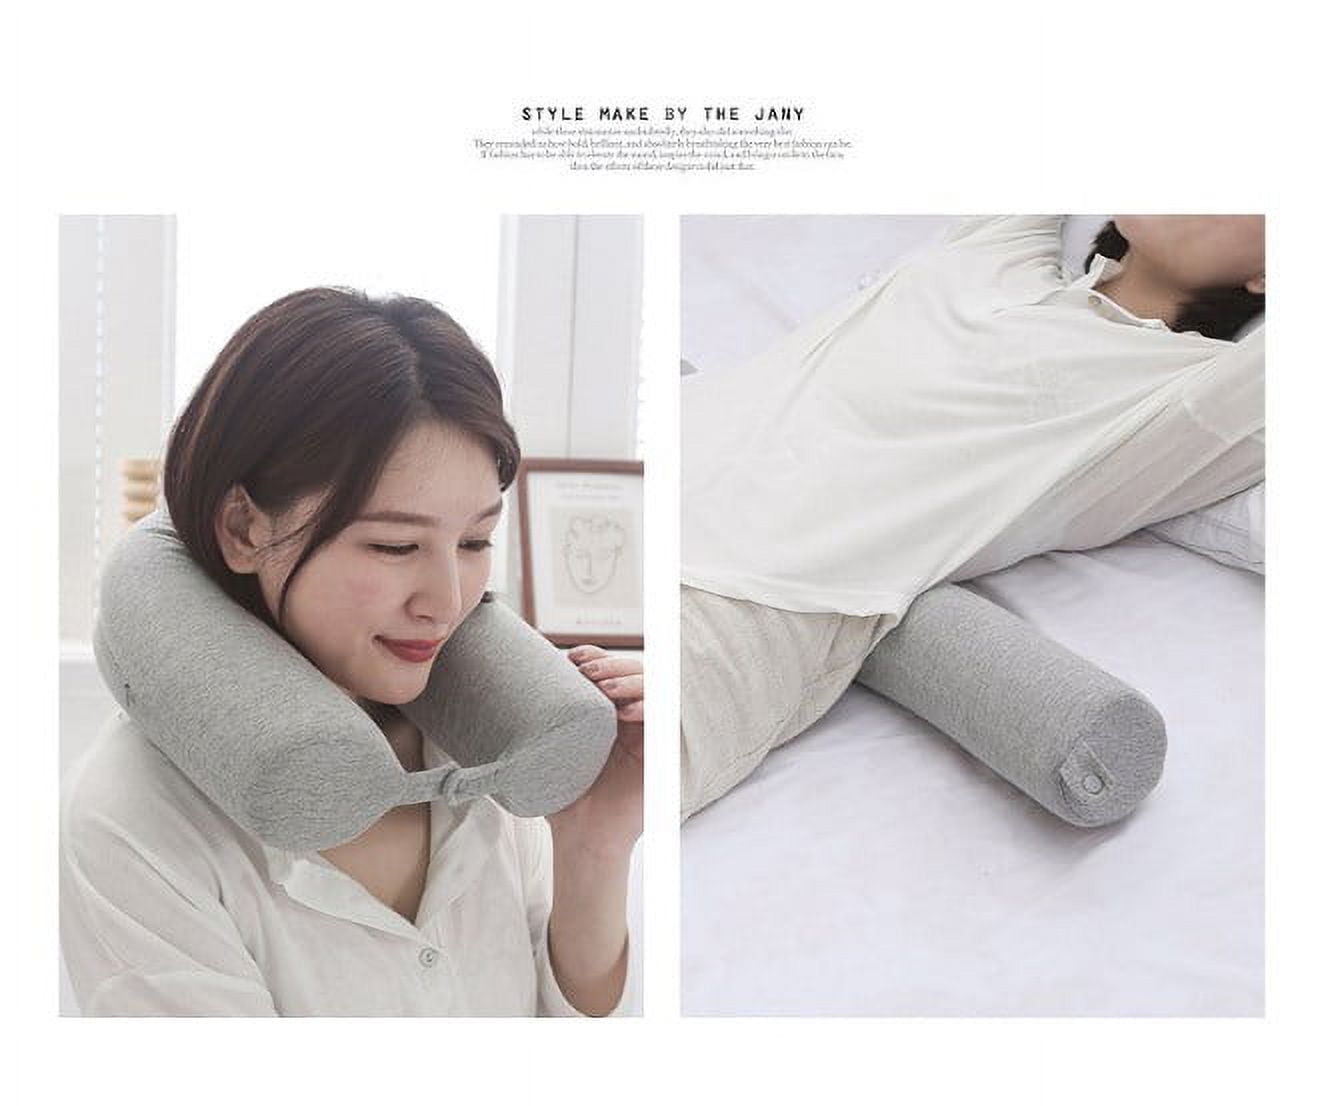 Xtra-Comfort Twist Memory Foam Travel Pillow for Neck, Chin, Lumbar and Leg Support - Neck Cushion for Traveling on Airplane - for Side, Stomach and B